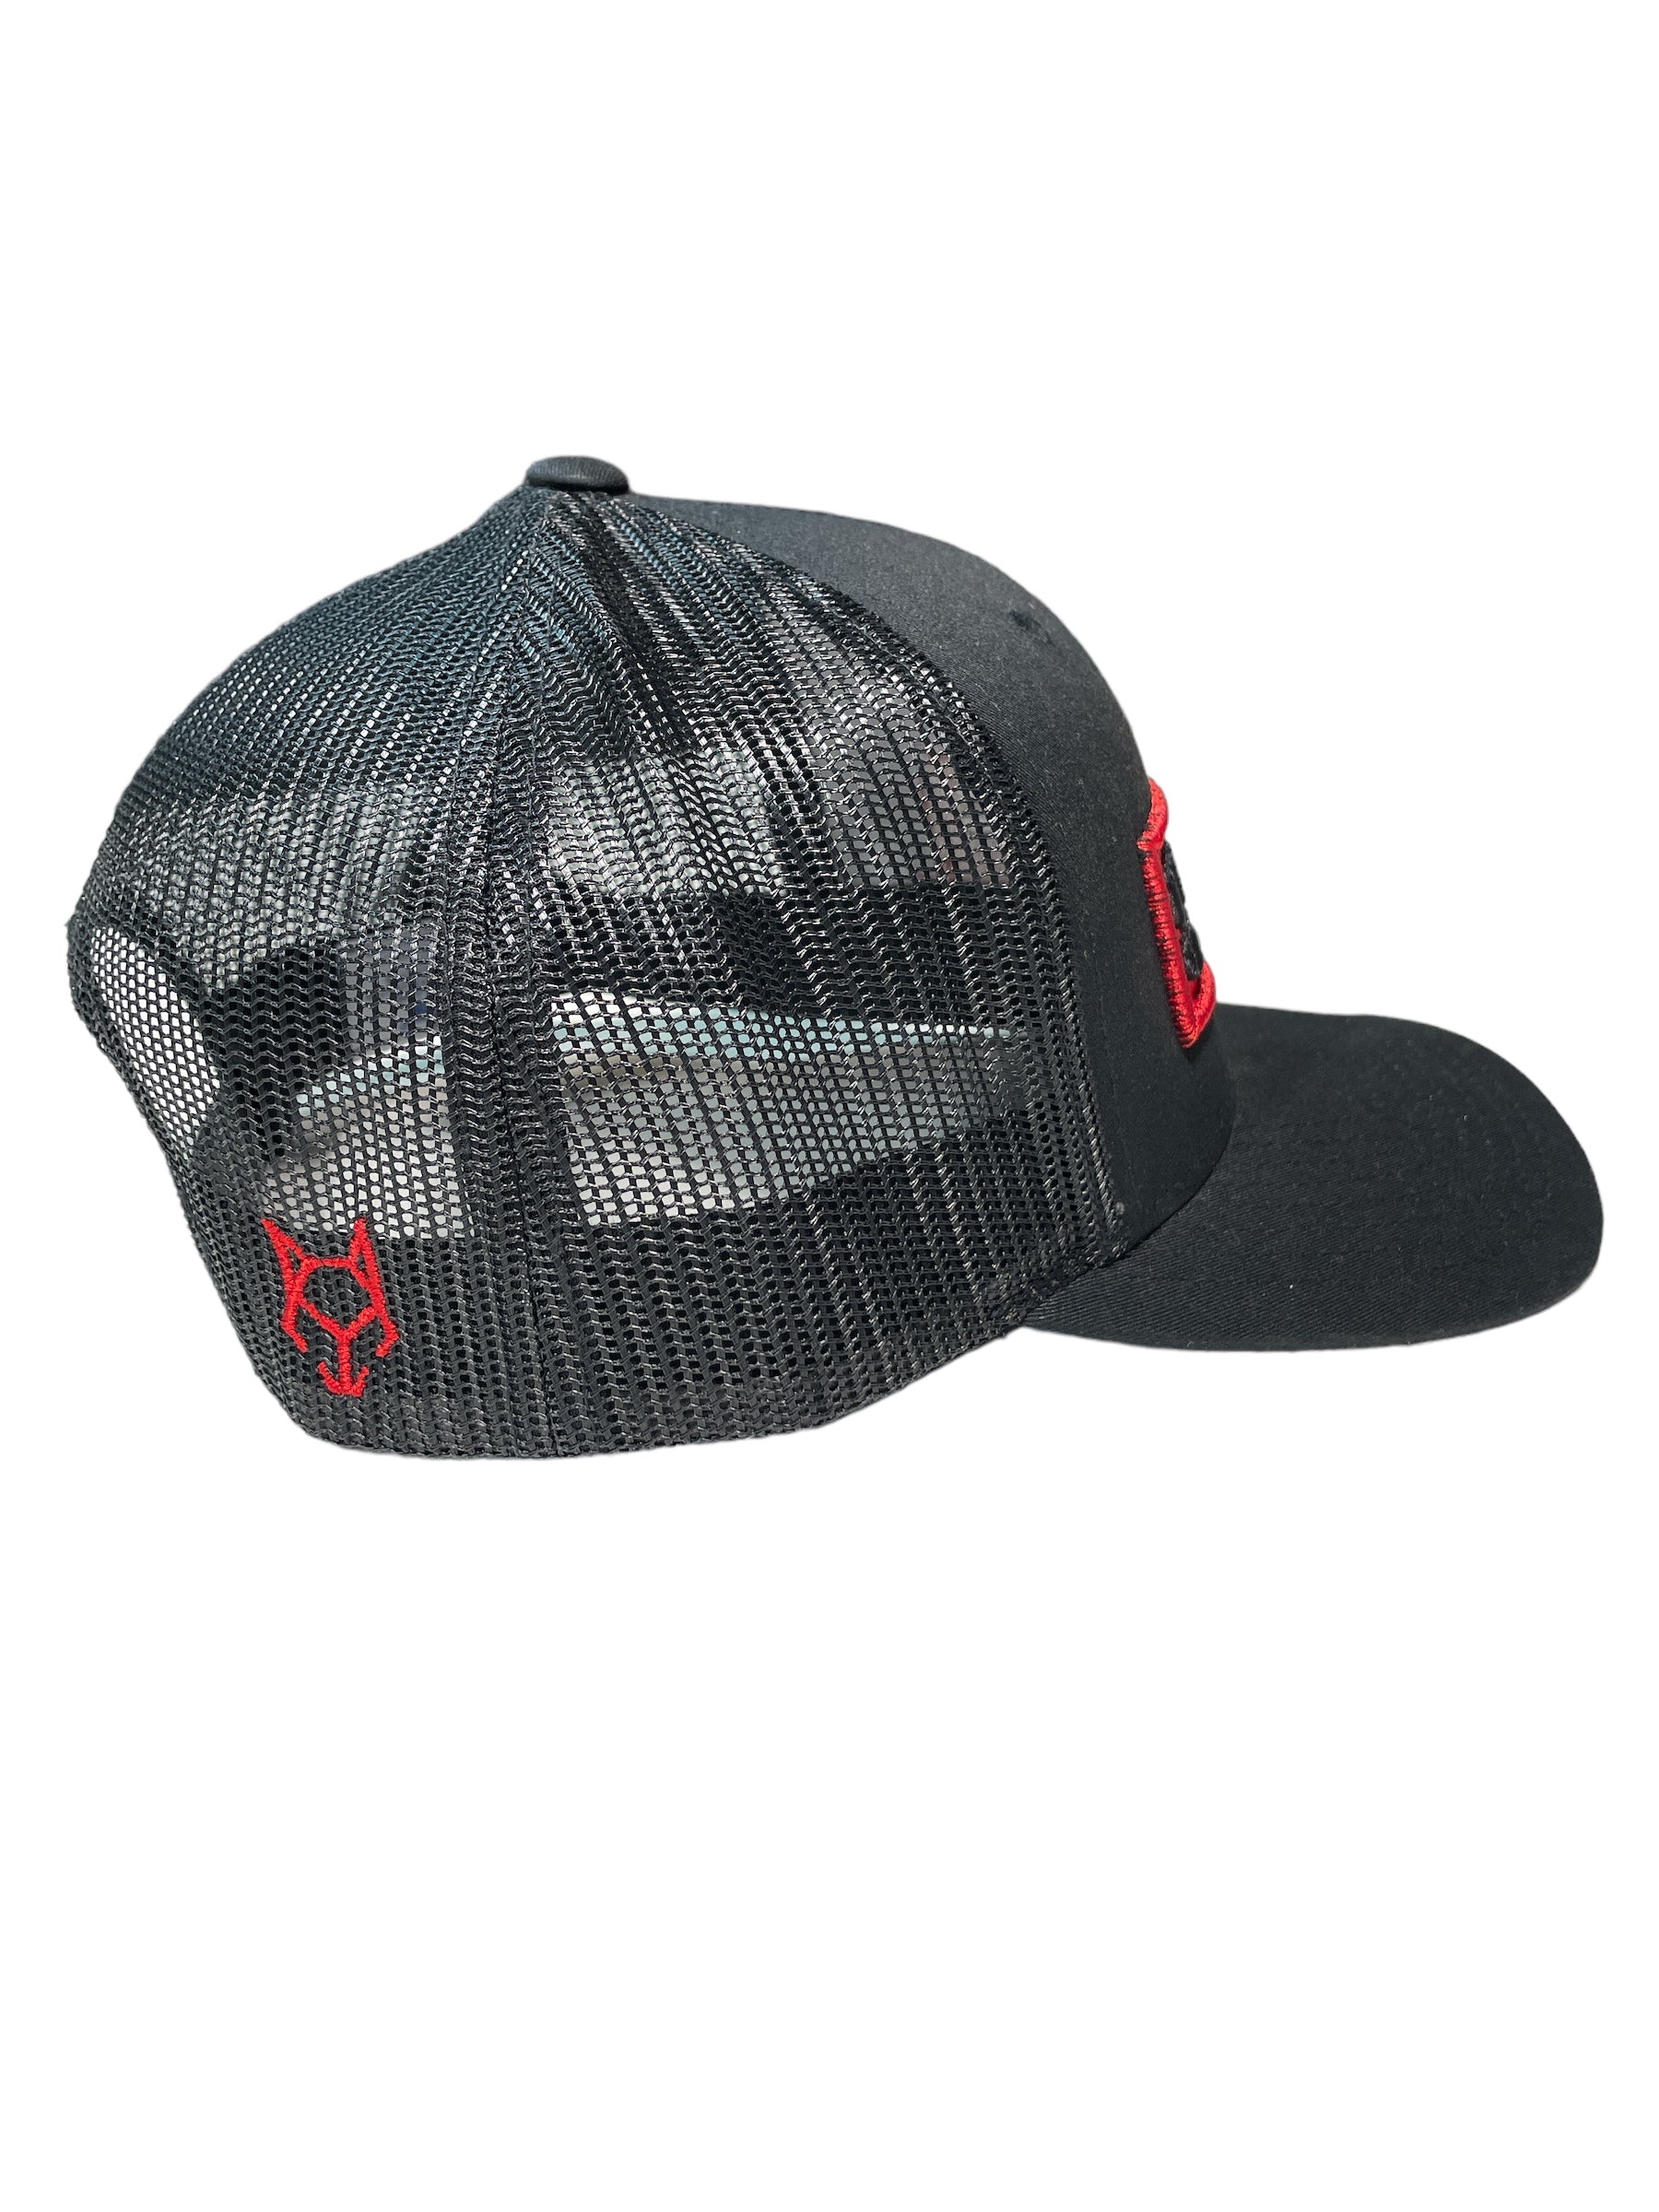 Black with Red Logo - Snapback